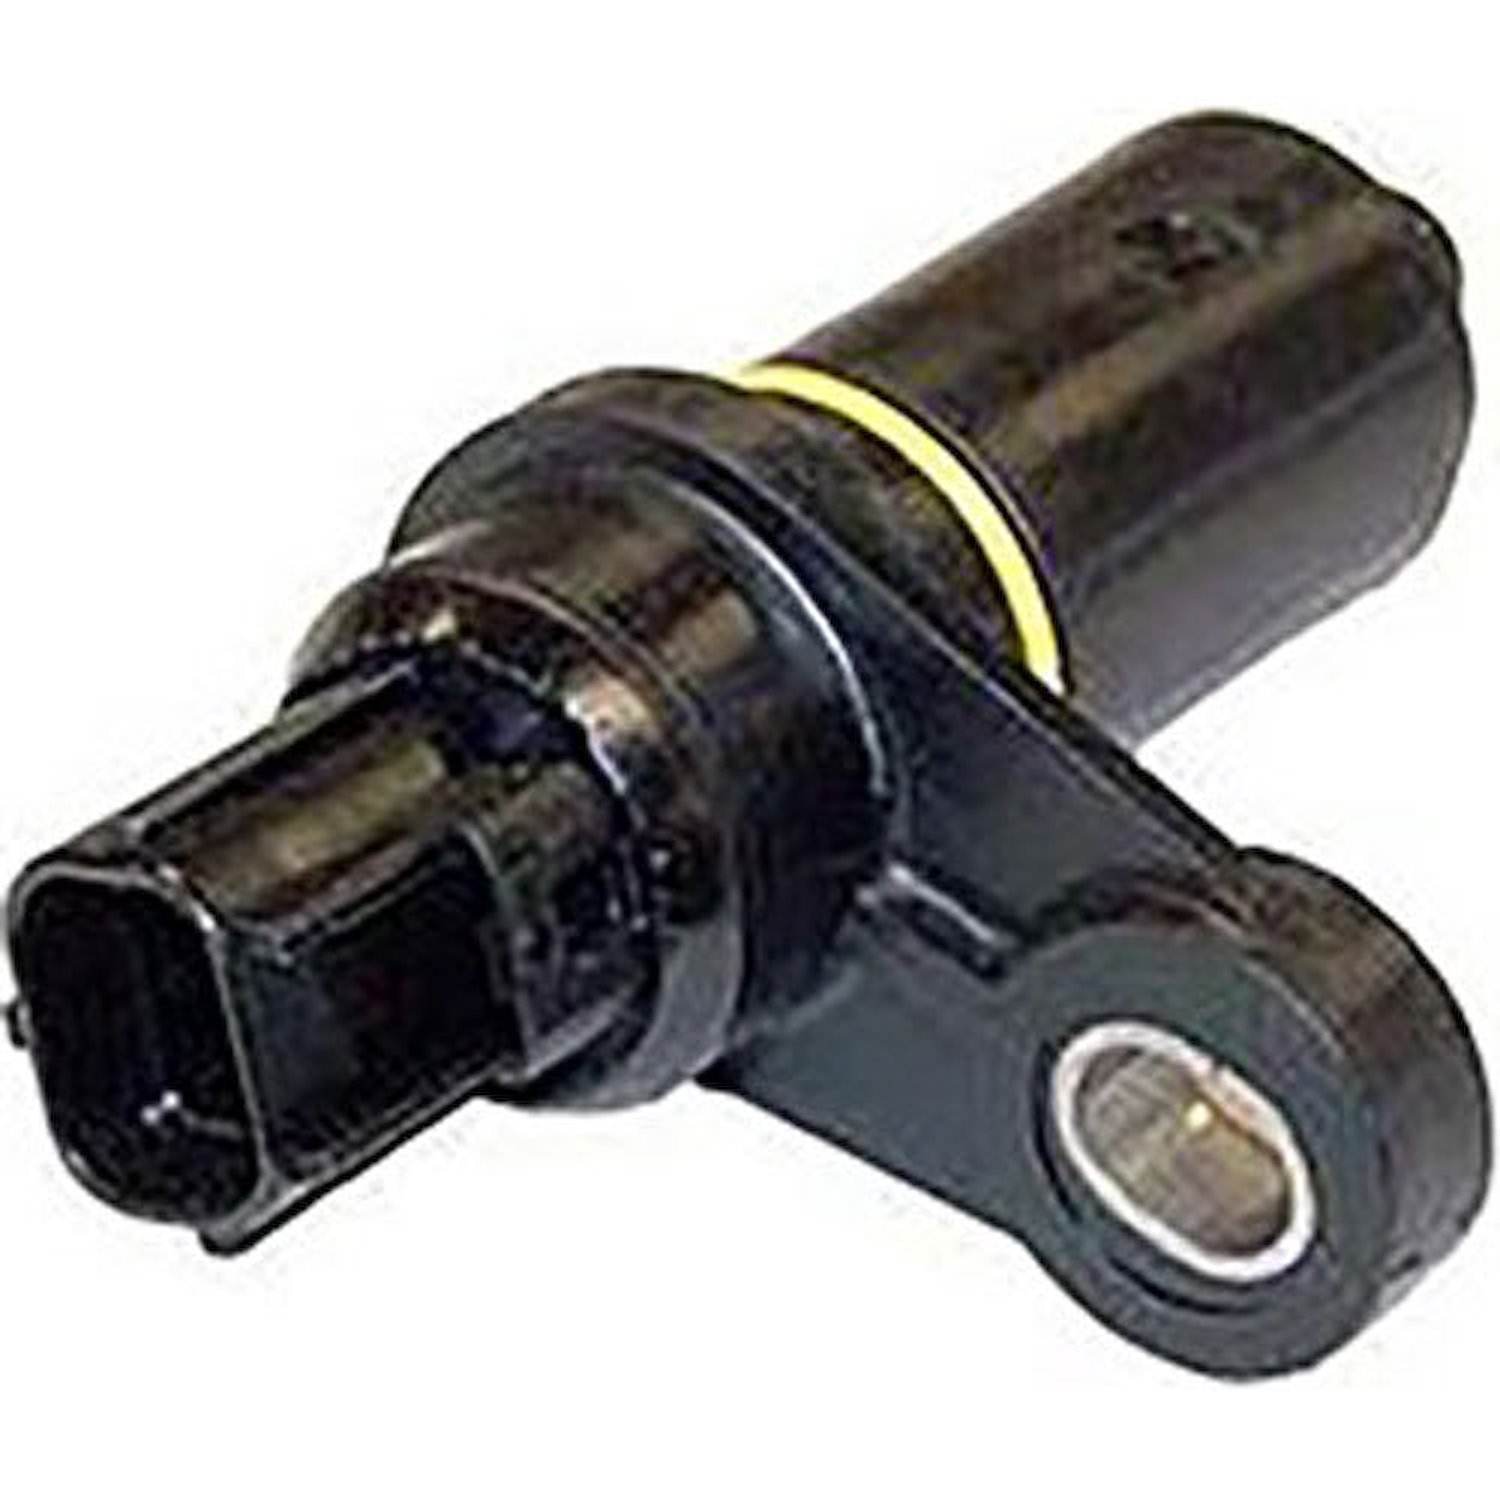 This vehicle speed sensor transmission output sensor from Omix-ADA fits 03-11 Jeep Libertys and Wran